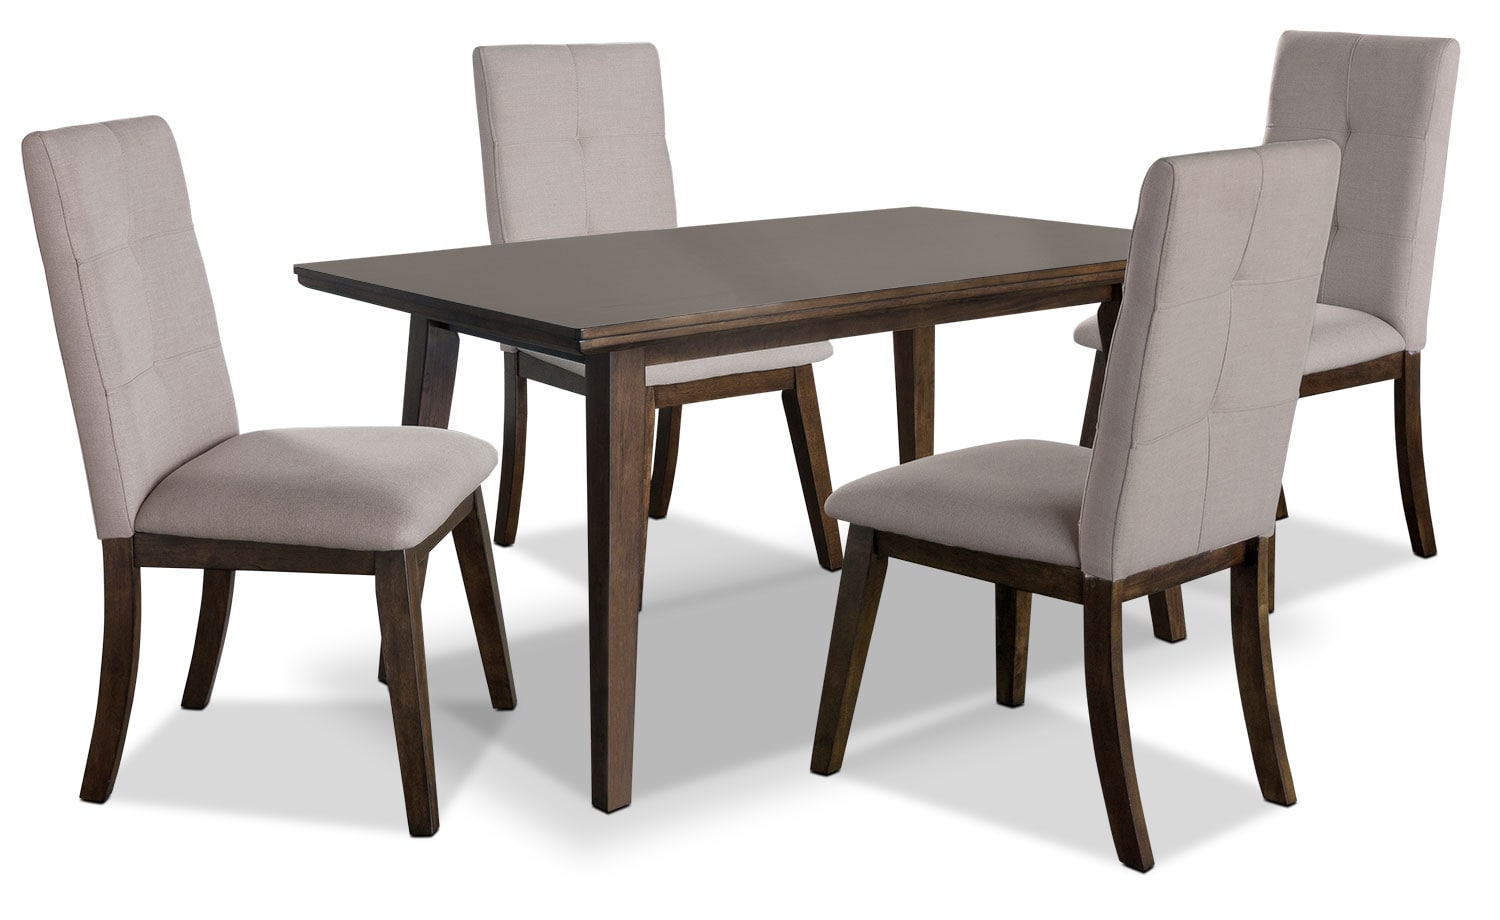 Chelsea 5-Piece Dining Table Package with Beige Chairs ...